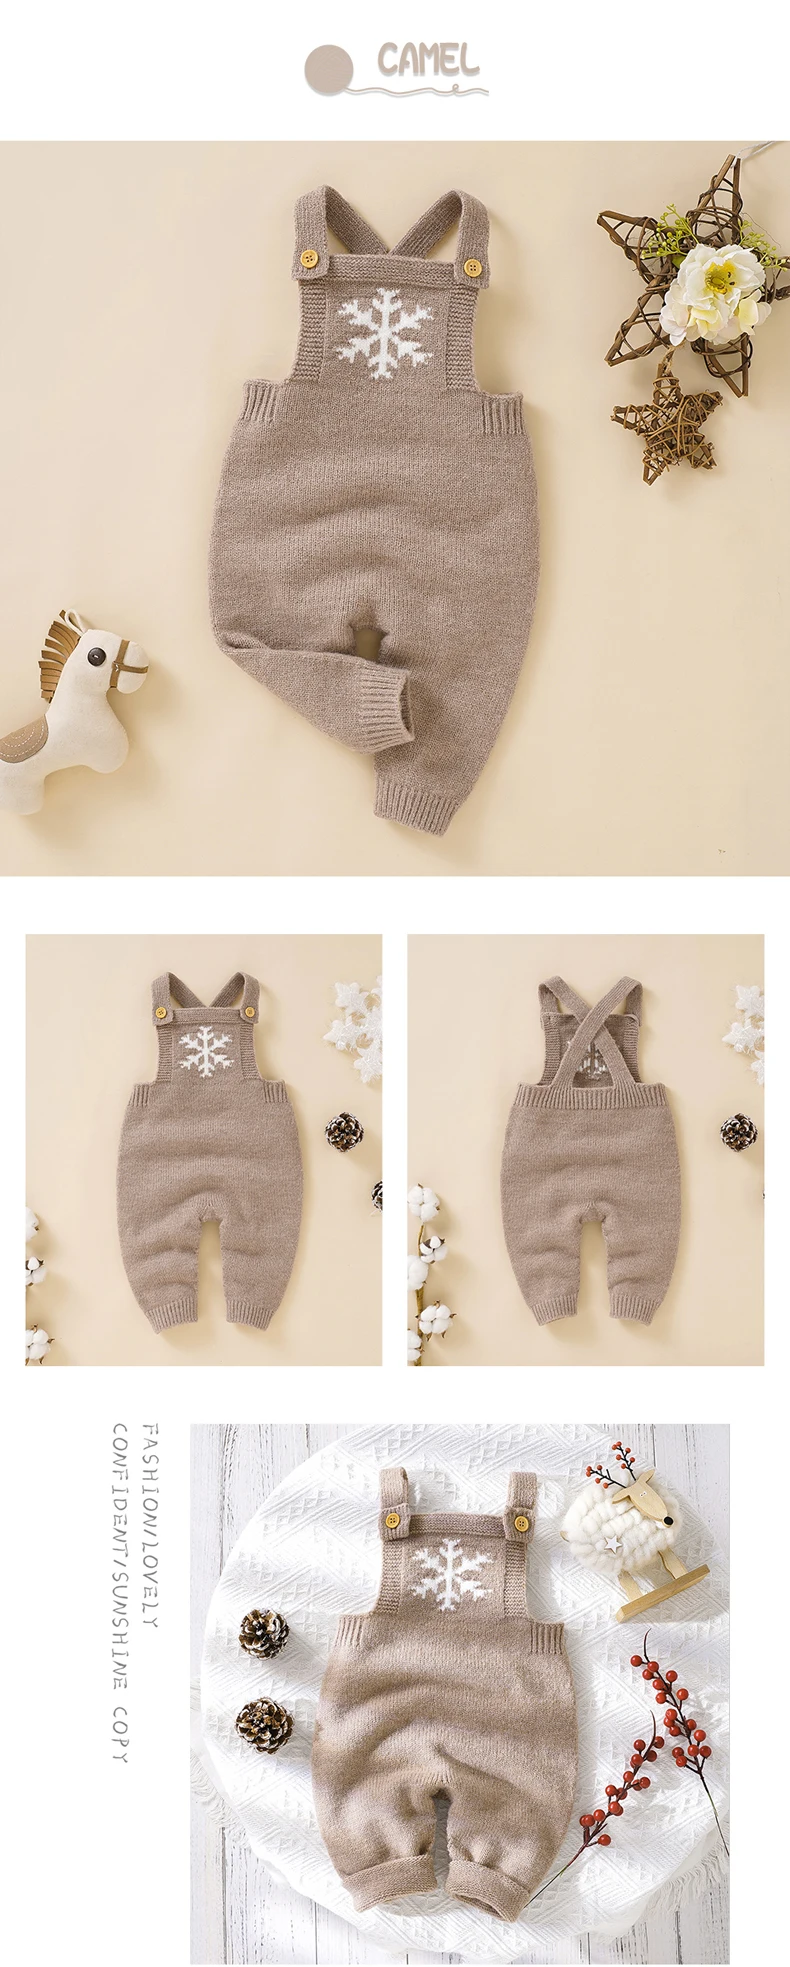 vintage Baby Bodysuits Baby Romper Knitted Solid Newborn Boy Girl Jumpsuit Outfits Sleeveless Summer Infant Children Clothing Autumn Top Onesie Sweater coloured baby bodysuits